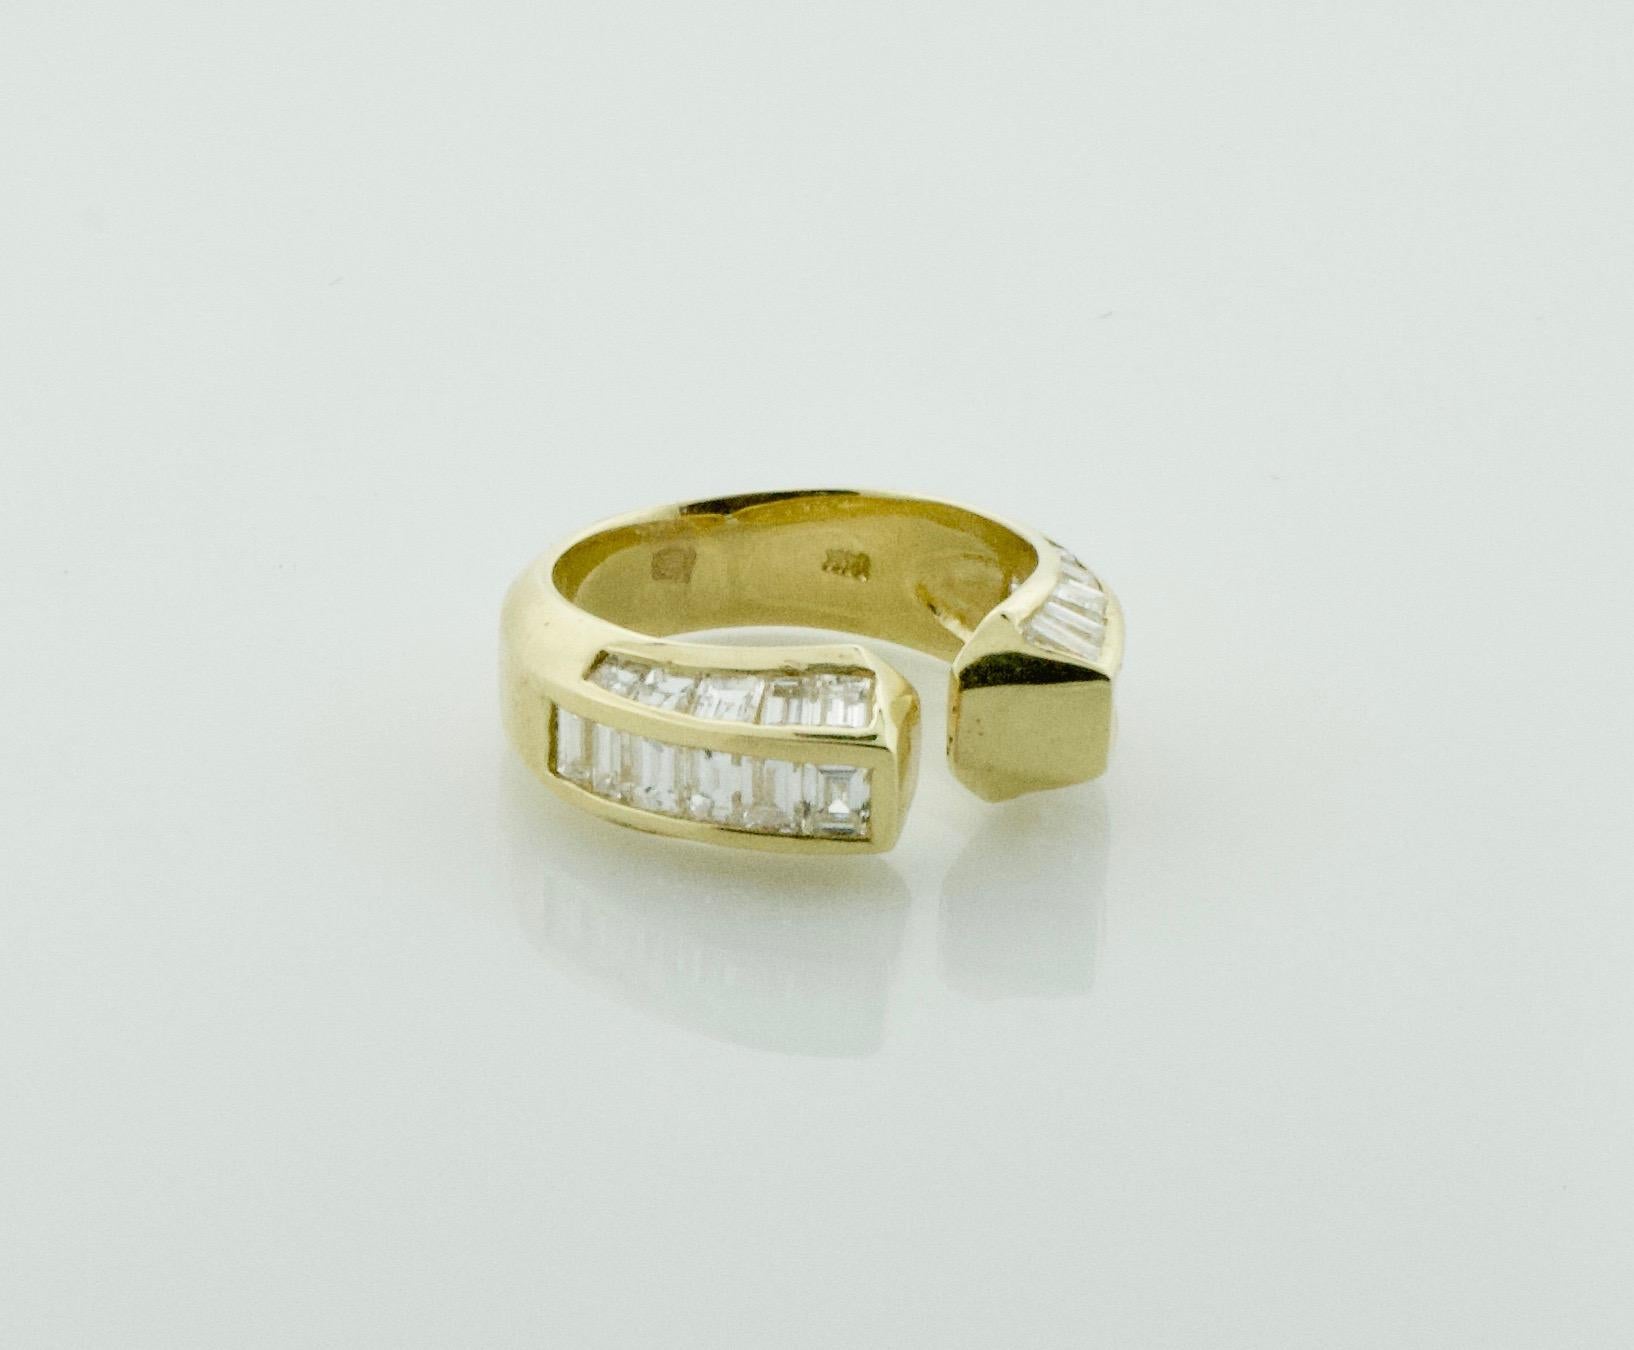 Delightful Petite Diamond Ring in 14k Yellow Gold 1.15 Carats Total 
32 Baguette and Squrae Cut Diamonds Weighing 1.15 Carats Approximately GH VVS
Currently Size 5.5 Can Easily Sized By Us or Your Qualified Jeweler
7.4 mm in Width